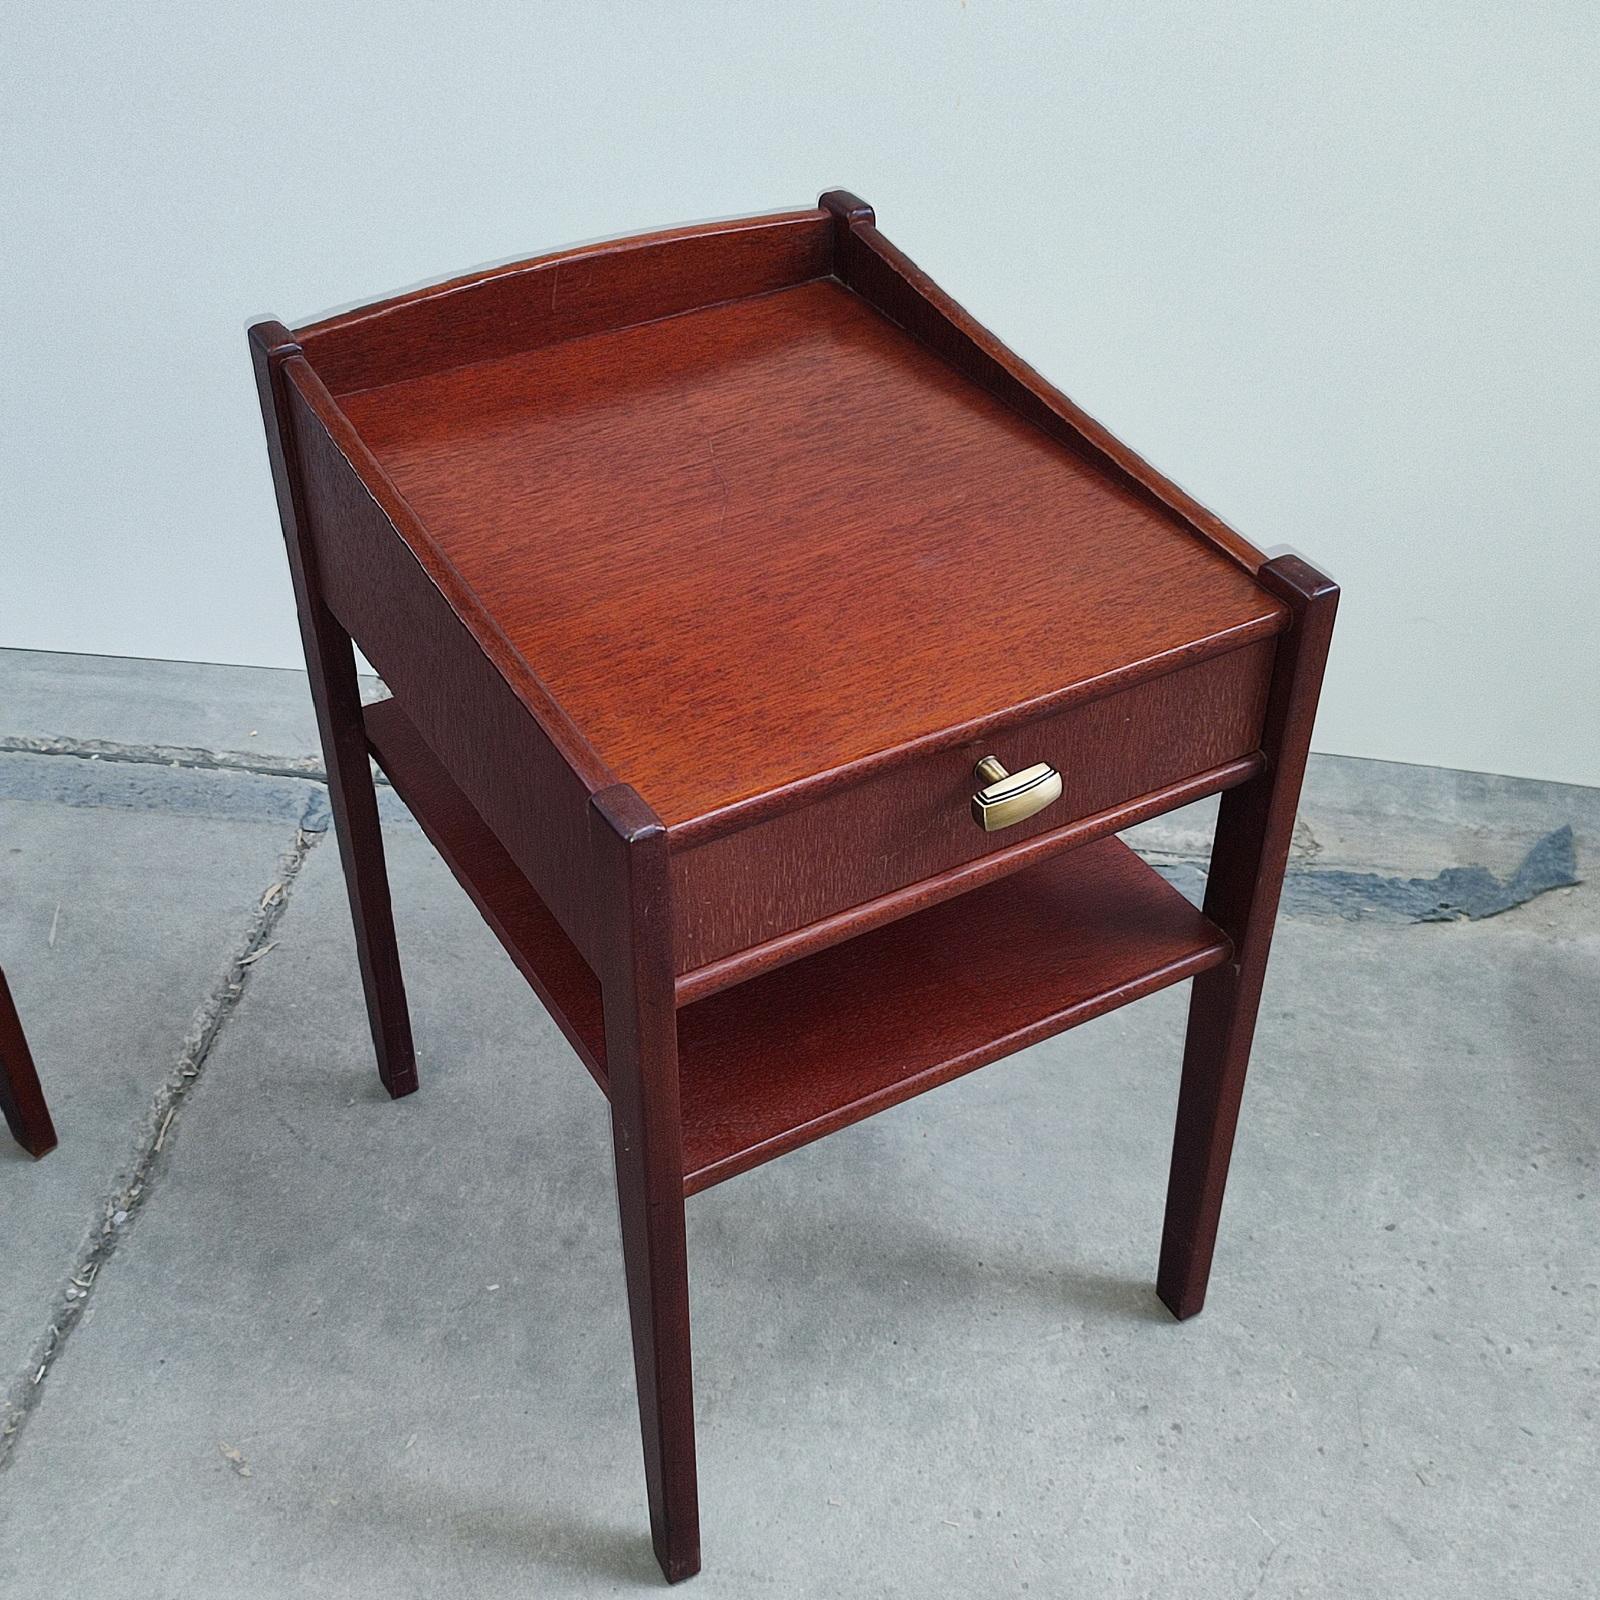 Pair of Mid-century Swedish Mahogany Nightstands, Bedside Tables, 1960s For Sale 2